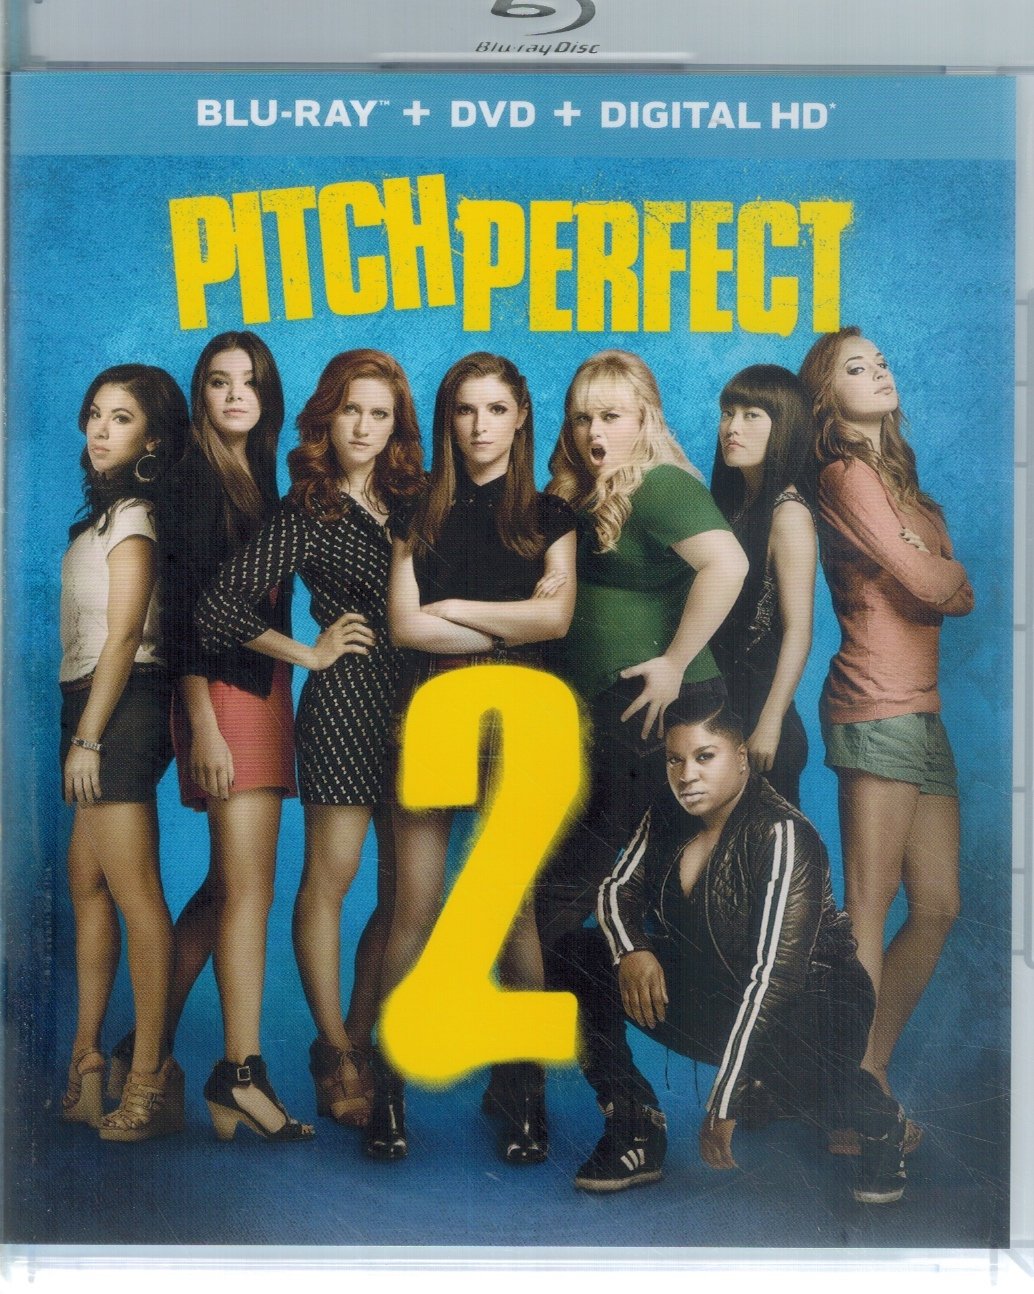 PITCH PERFECT 2 [BLU-RAY]  by Universal Pictures (Publisher)